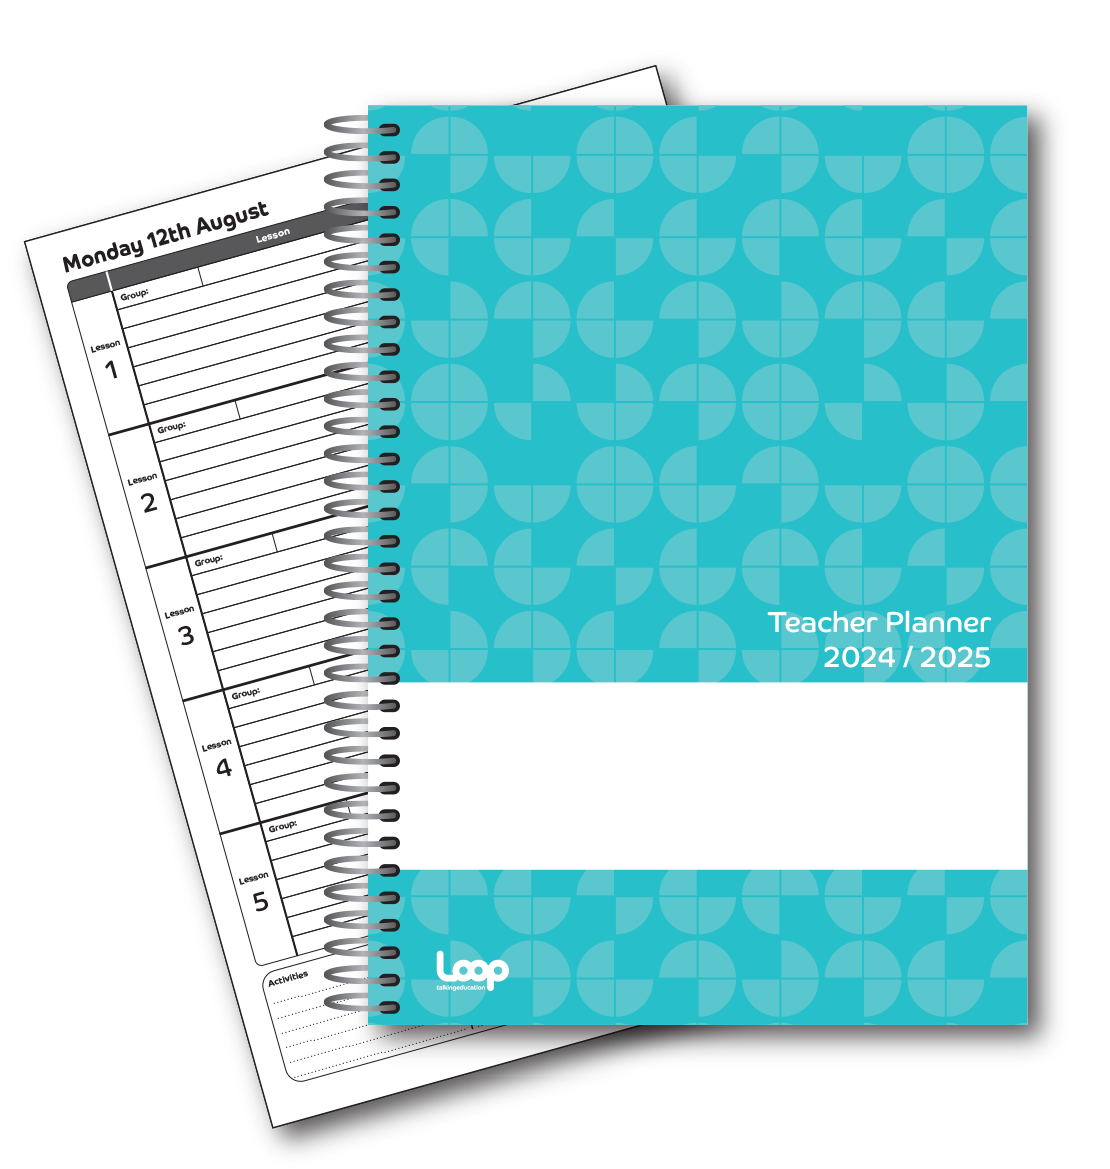 5 Lesson Dated Teacher Planner A5 size